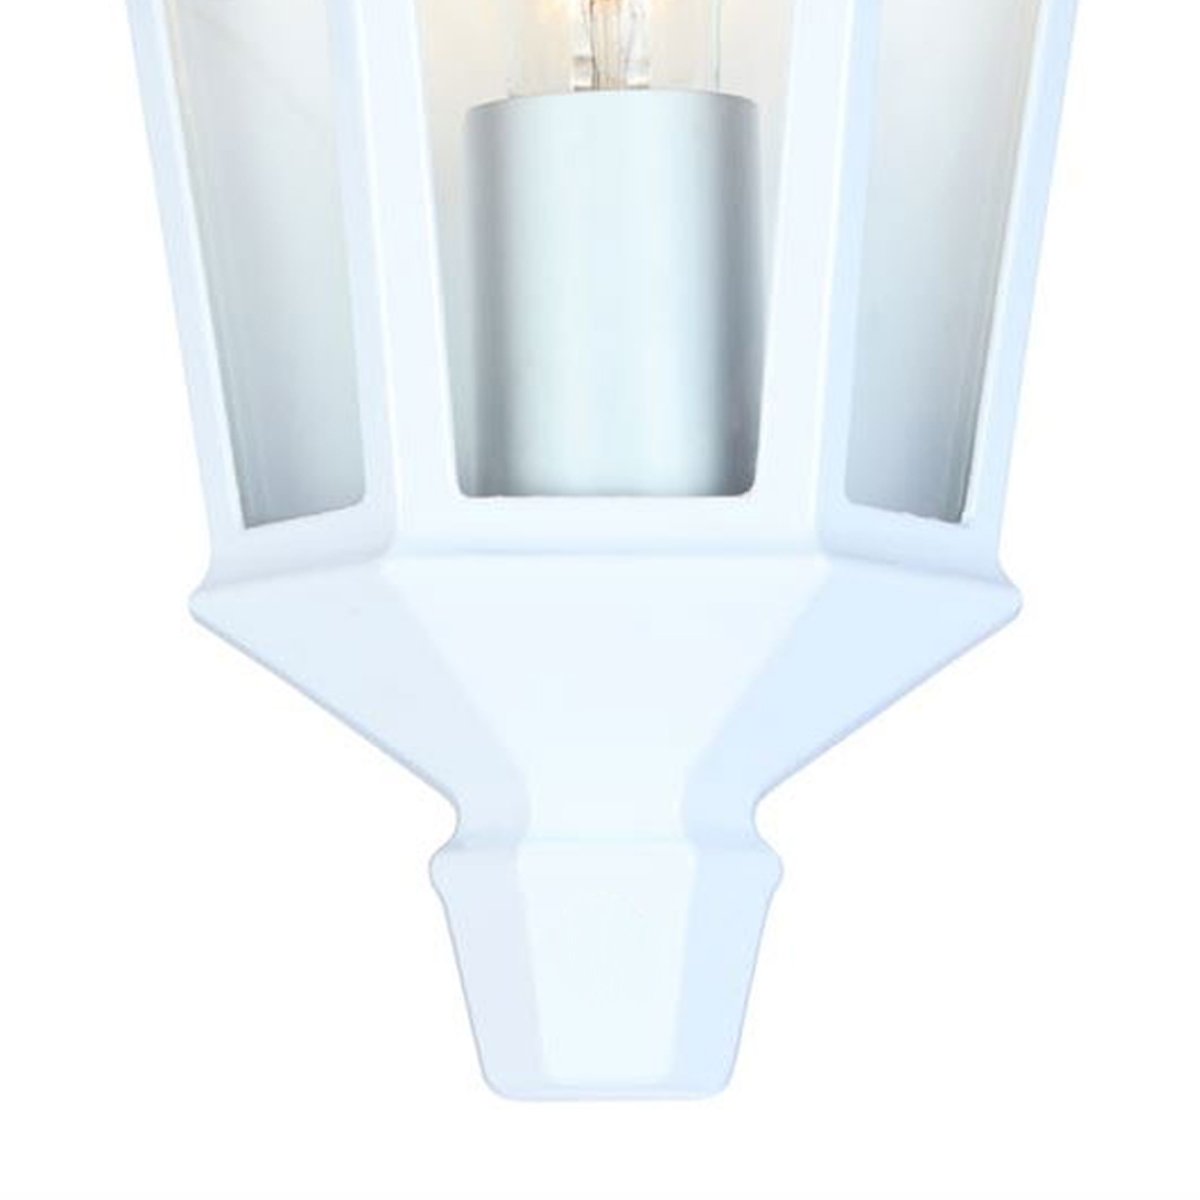 If you’re looking for a modern take on a traditional outdoor wall light, this glass half lantern flush wall light is perfect for adding style and protection for your home.   This product also contains an stylish white matt finish, making it ideal for any home design - adding a statement to any wall it fits in. Create an inviting glow over your garden and home with our Tyra glass coach lantern wall light by CGC Interiors.